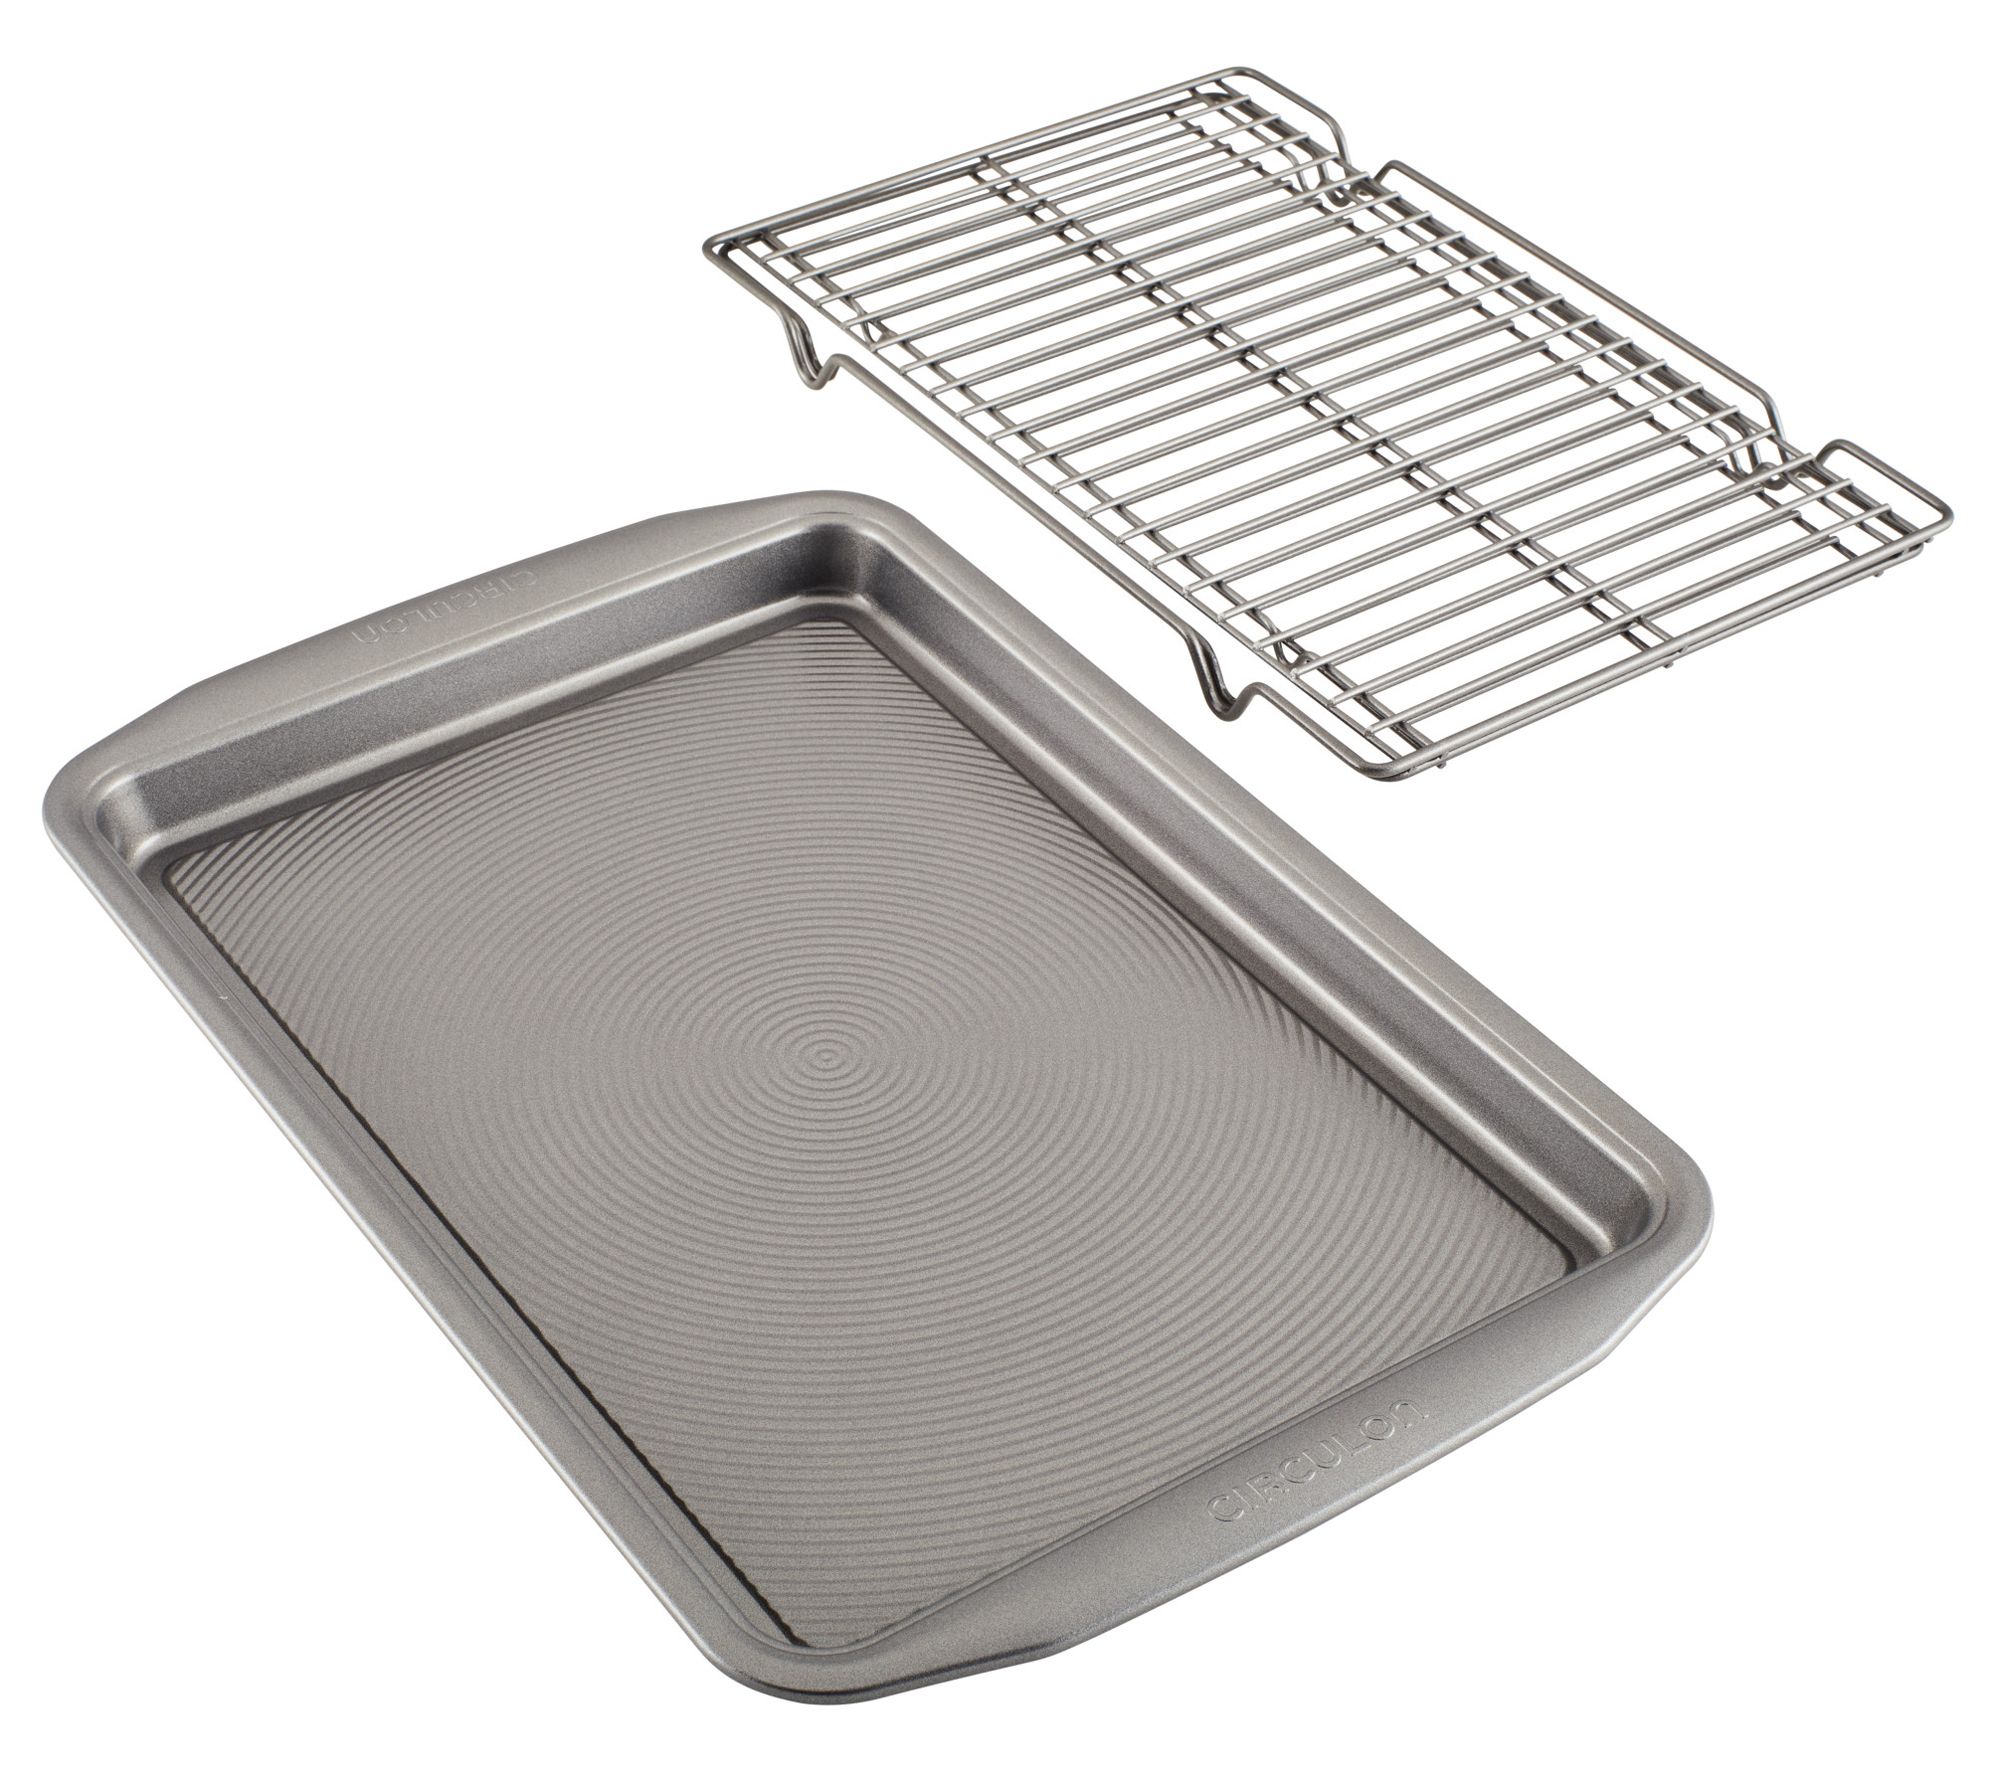 Circulon Nonstick 3pc Set: (2) 10x15 Cookie Pans And (1) Cooling